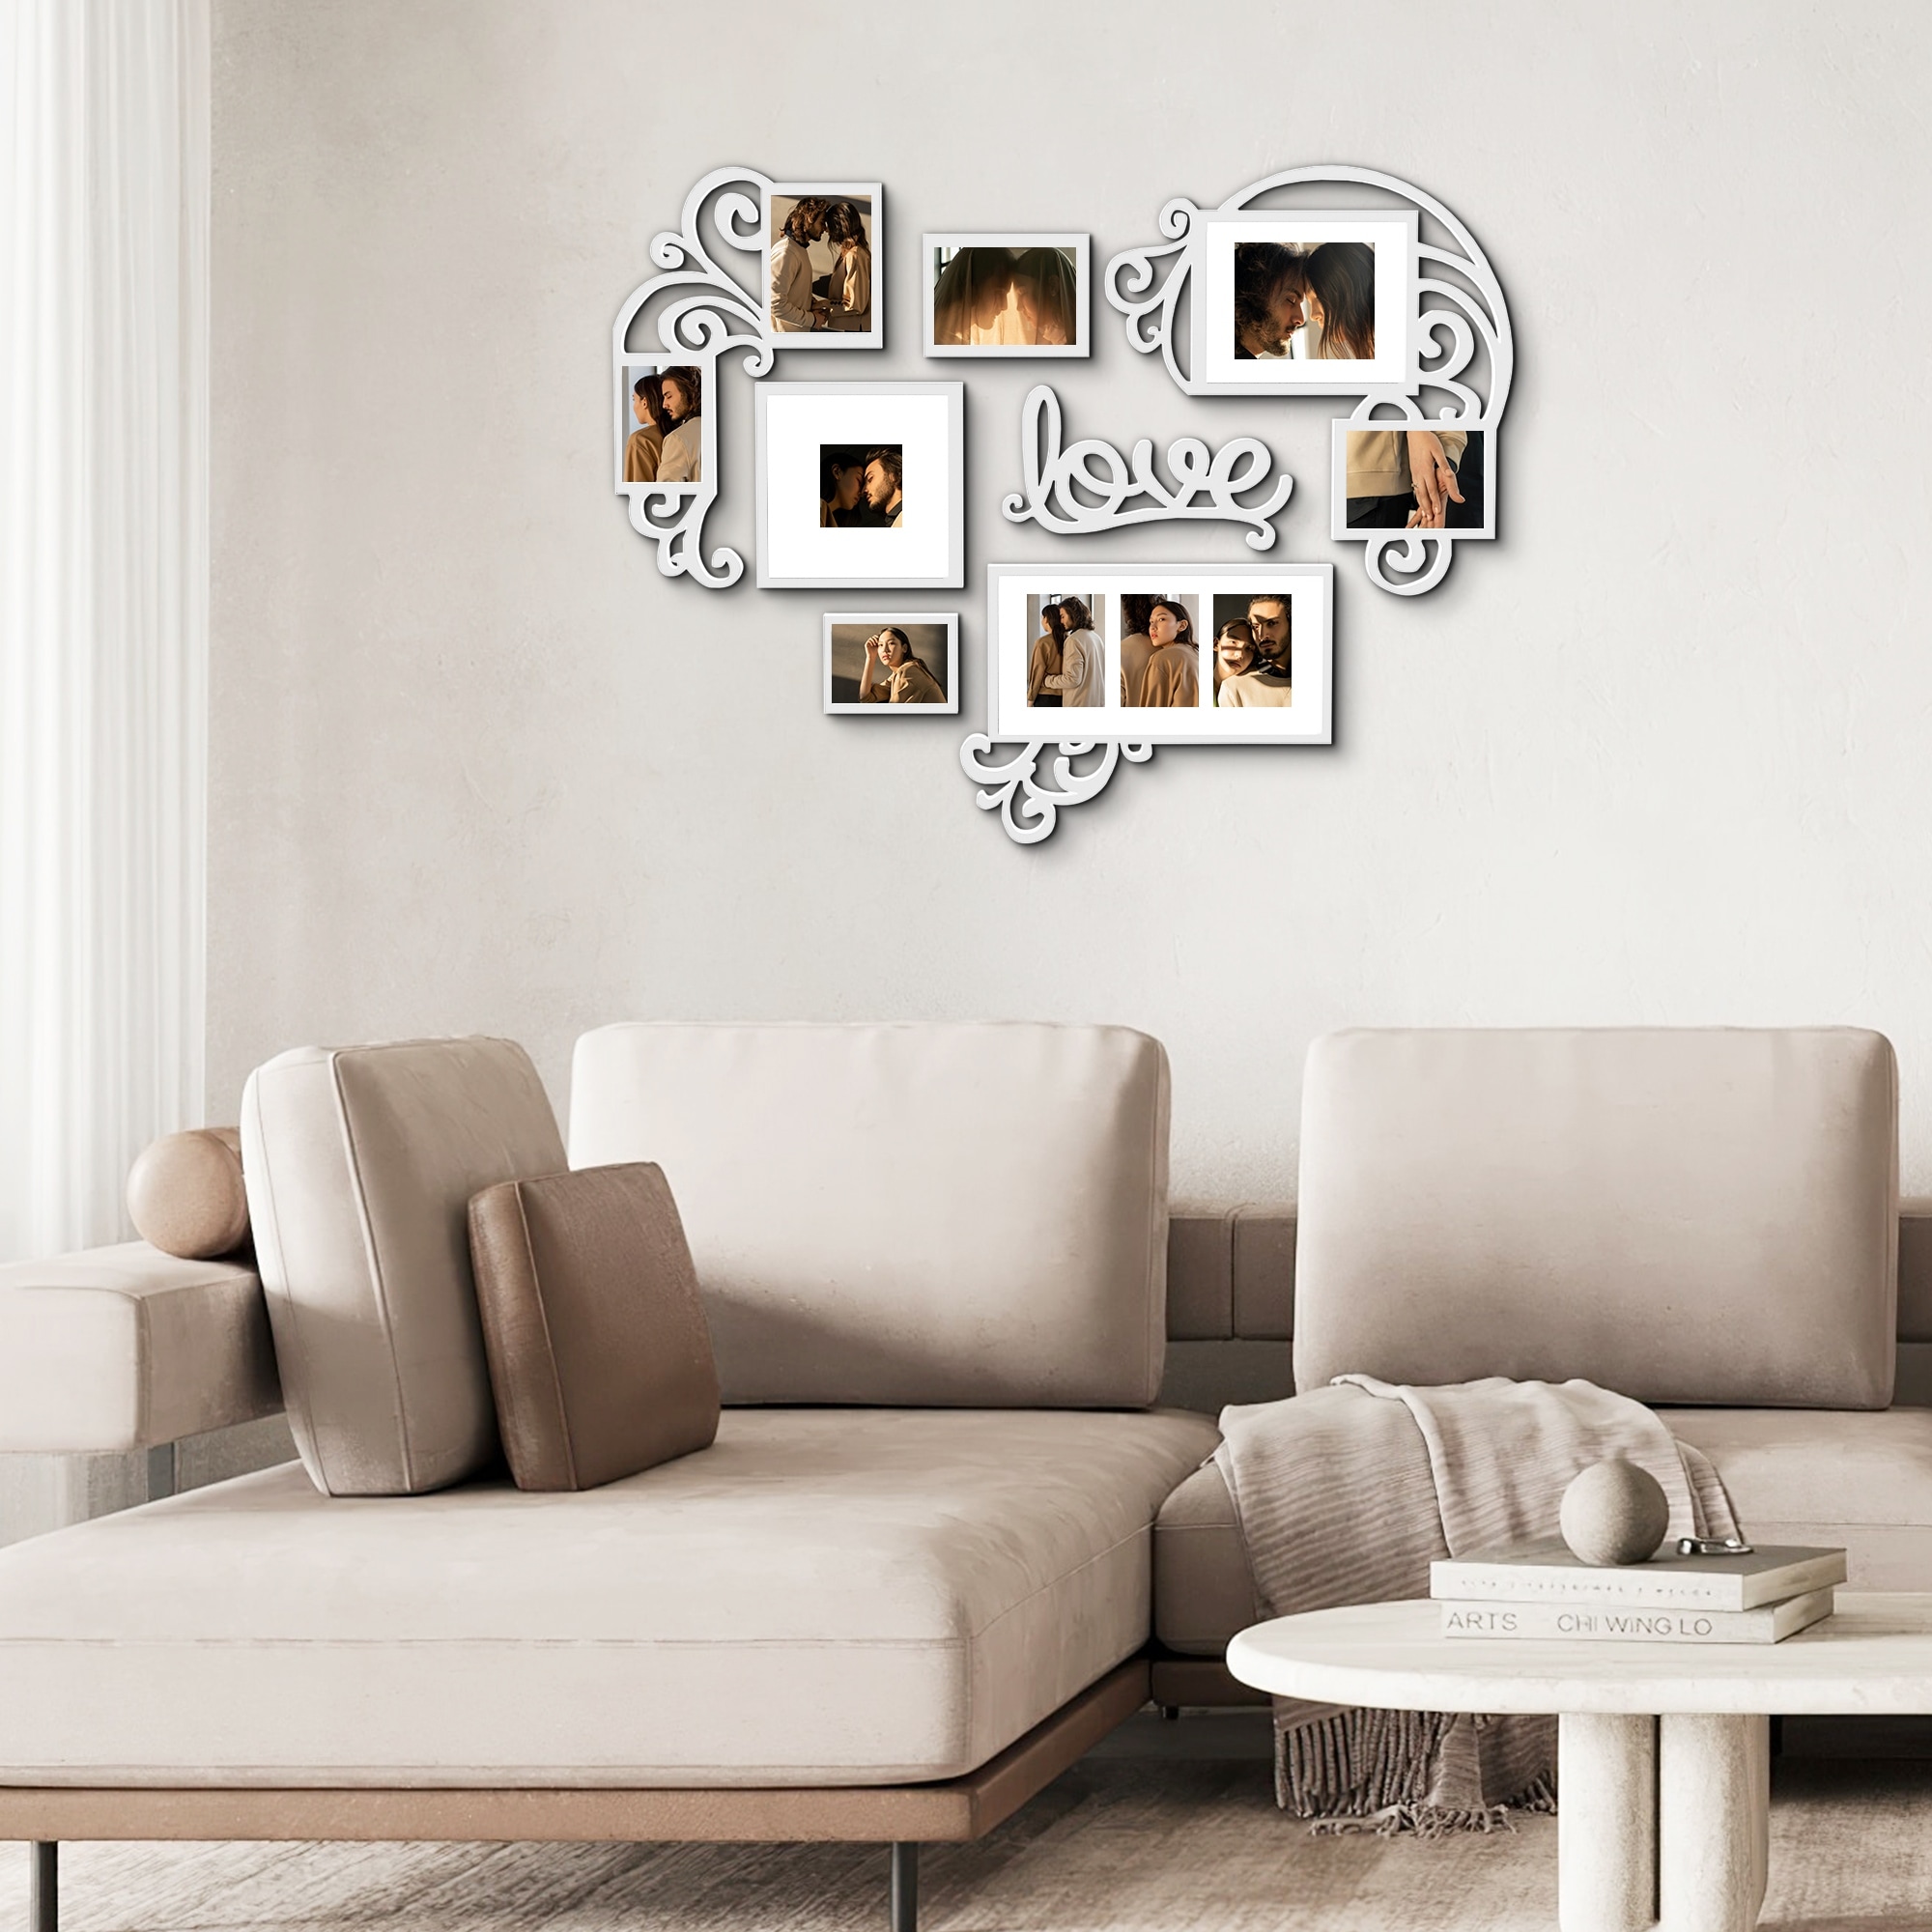 https://ak1.ostkcdn.com/images/products/is/images/direct/e5cc05a8590cd8d54d2534c269c116294a8ec3b5/Heart-Shaped-Family-Photo-Frame-Collage-Display-Three-4x6-Photos-White.jpg